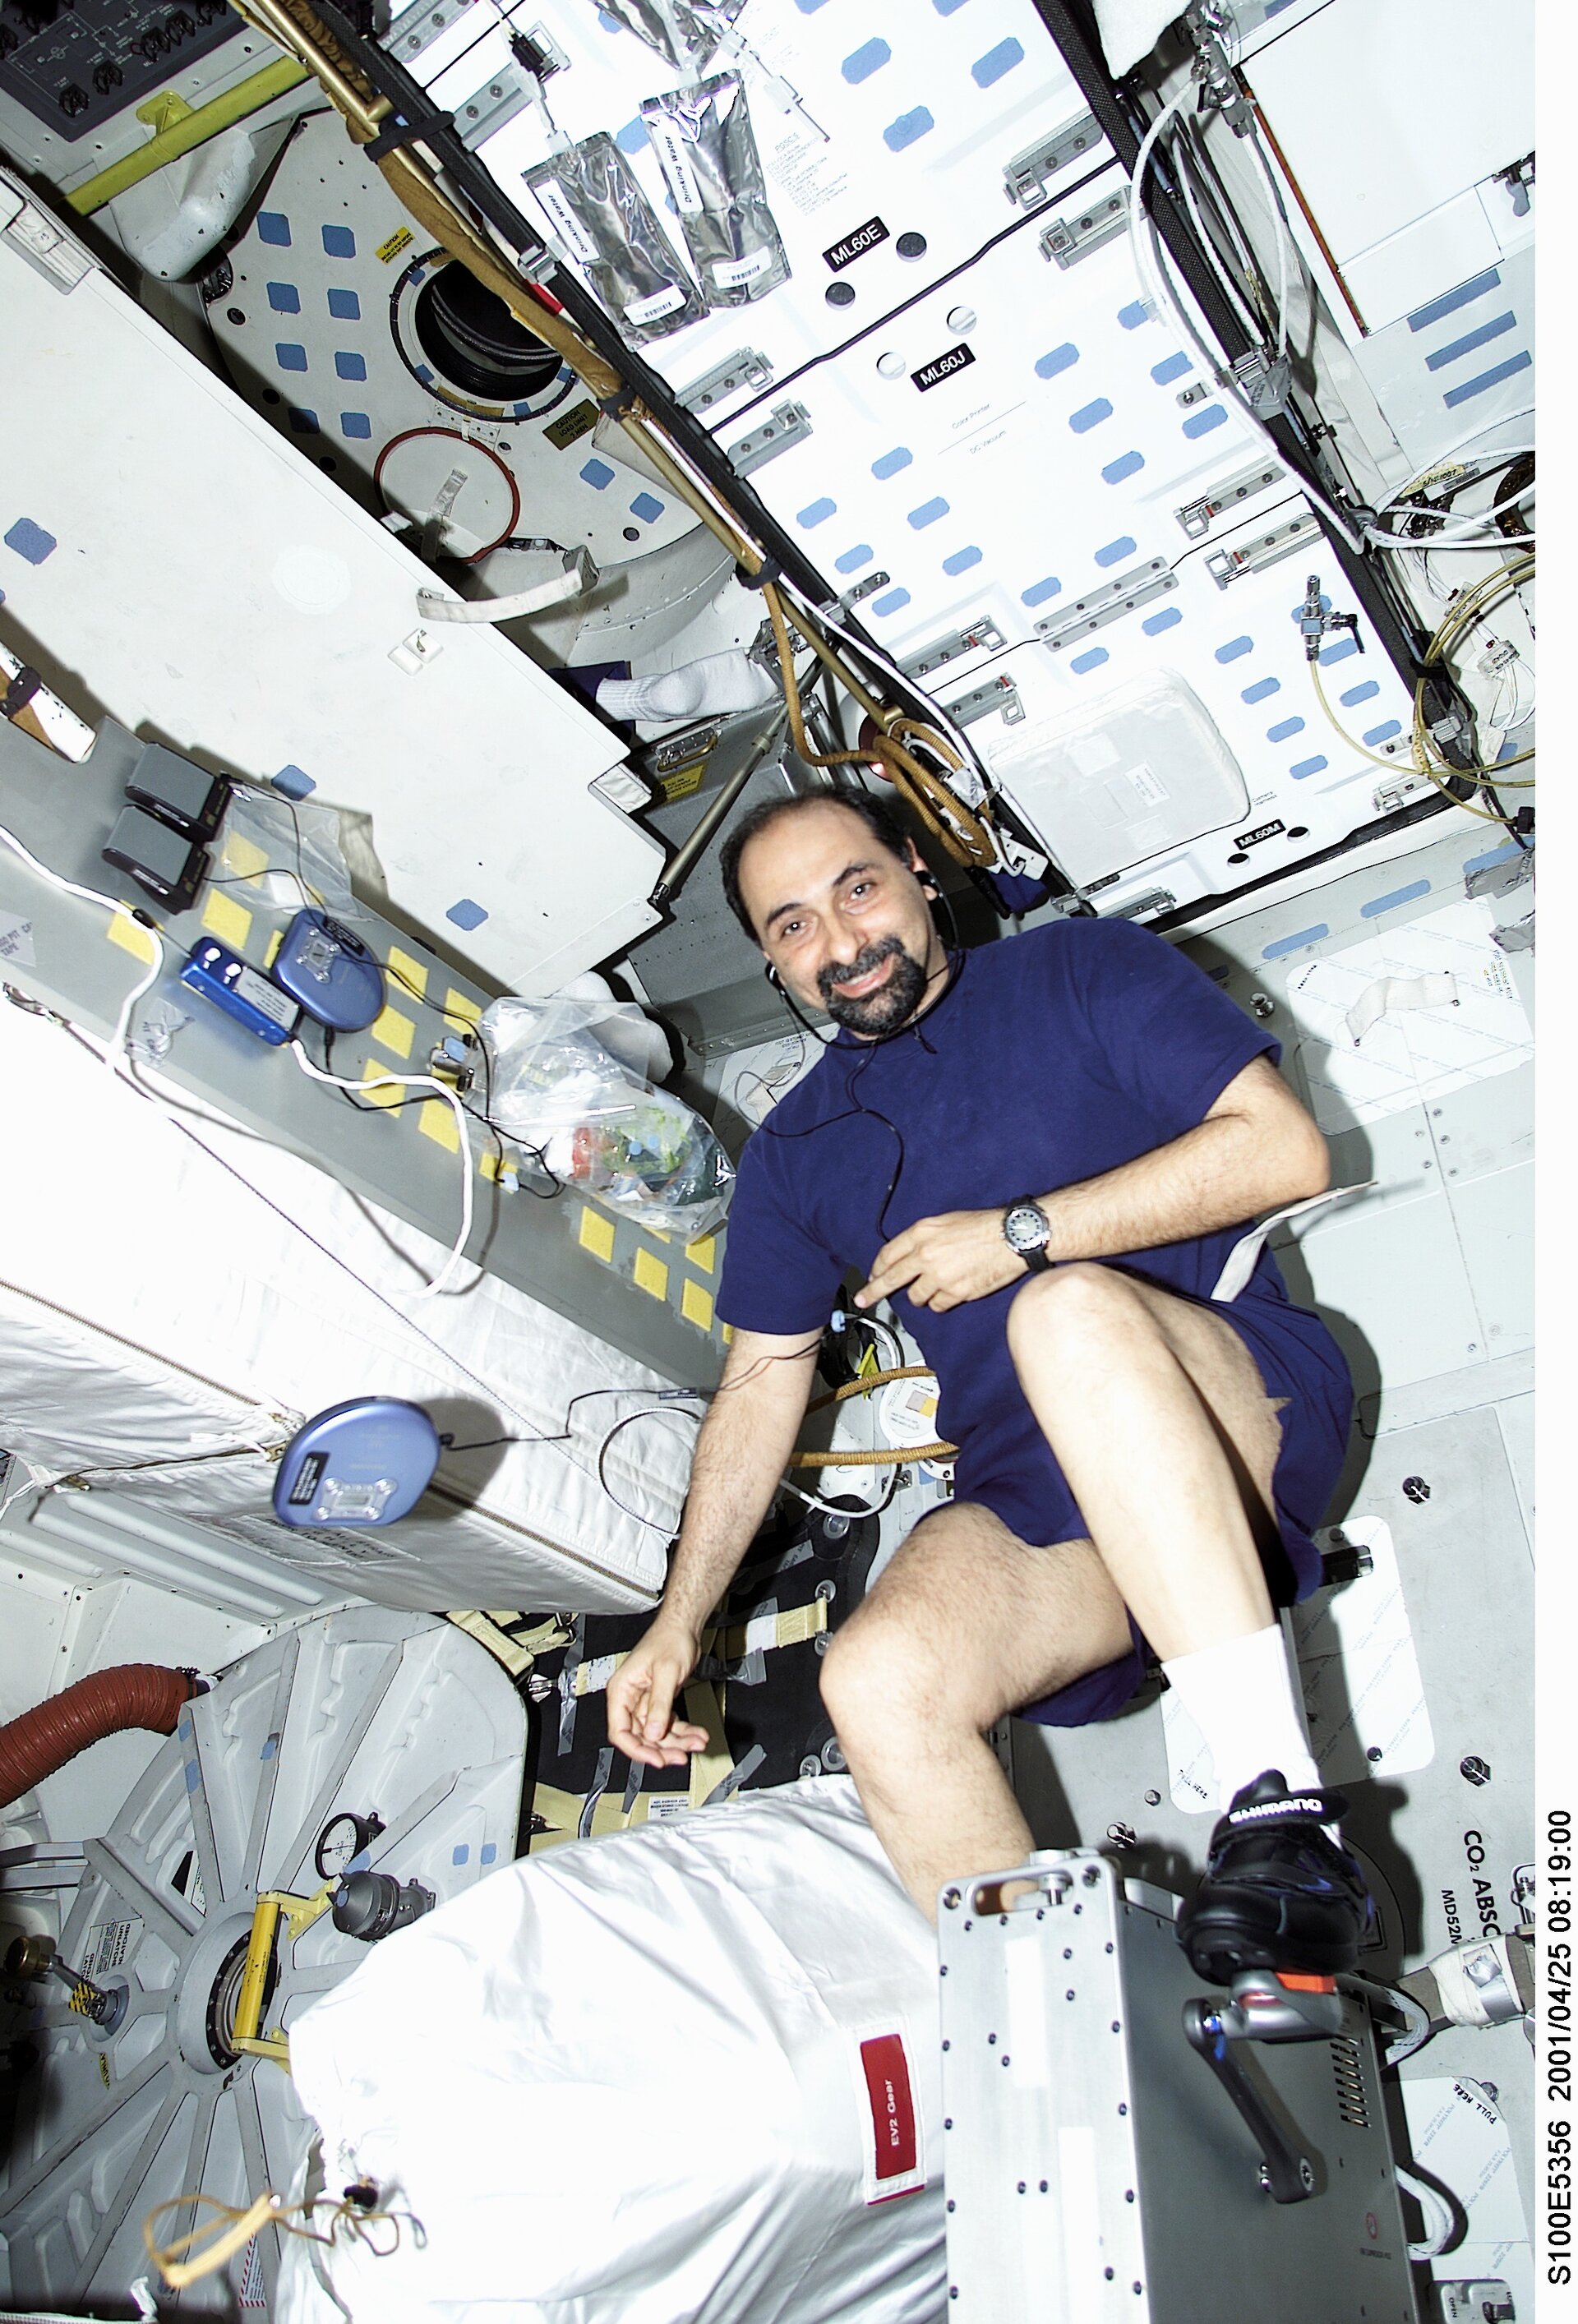 ESA astronaut Umberto Guidoni working out on a bicycle ergometer onboard the Space Shuttle